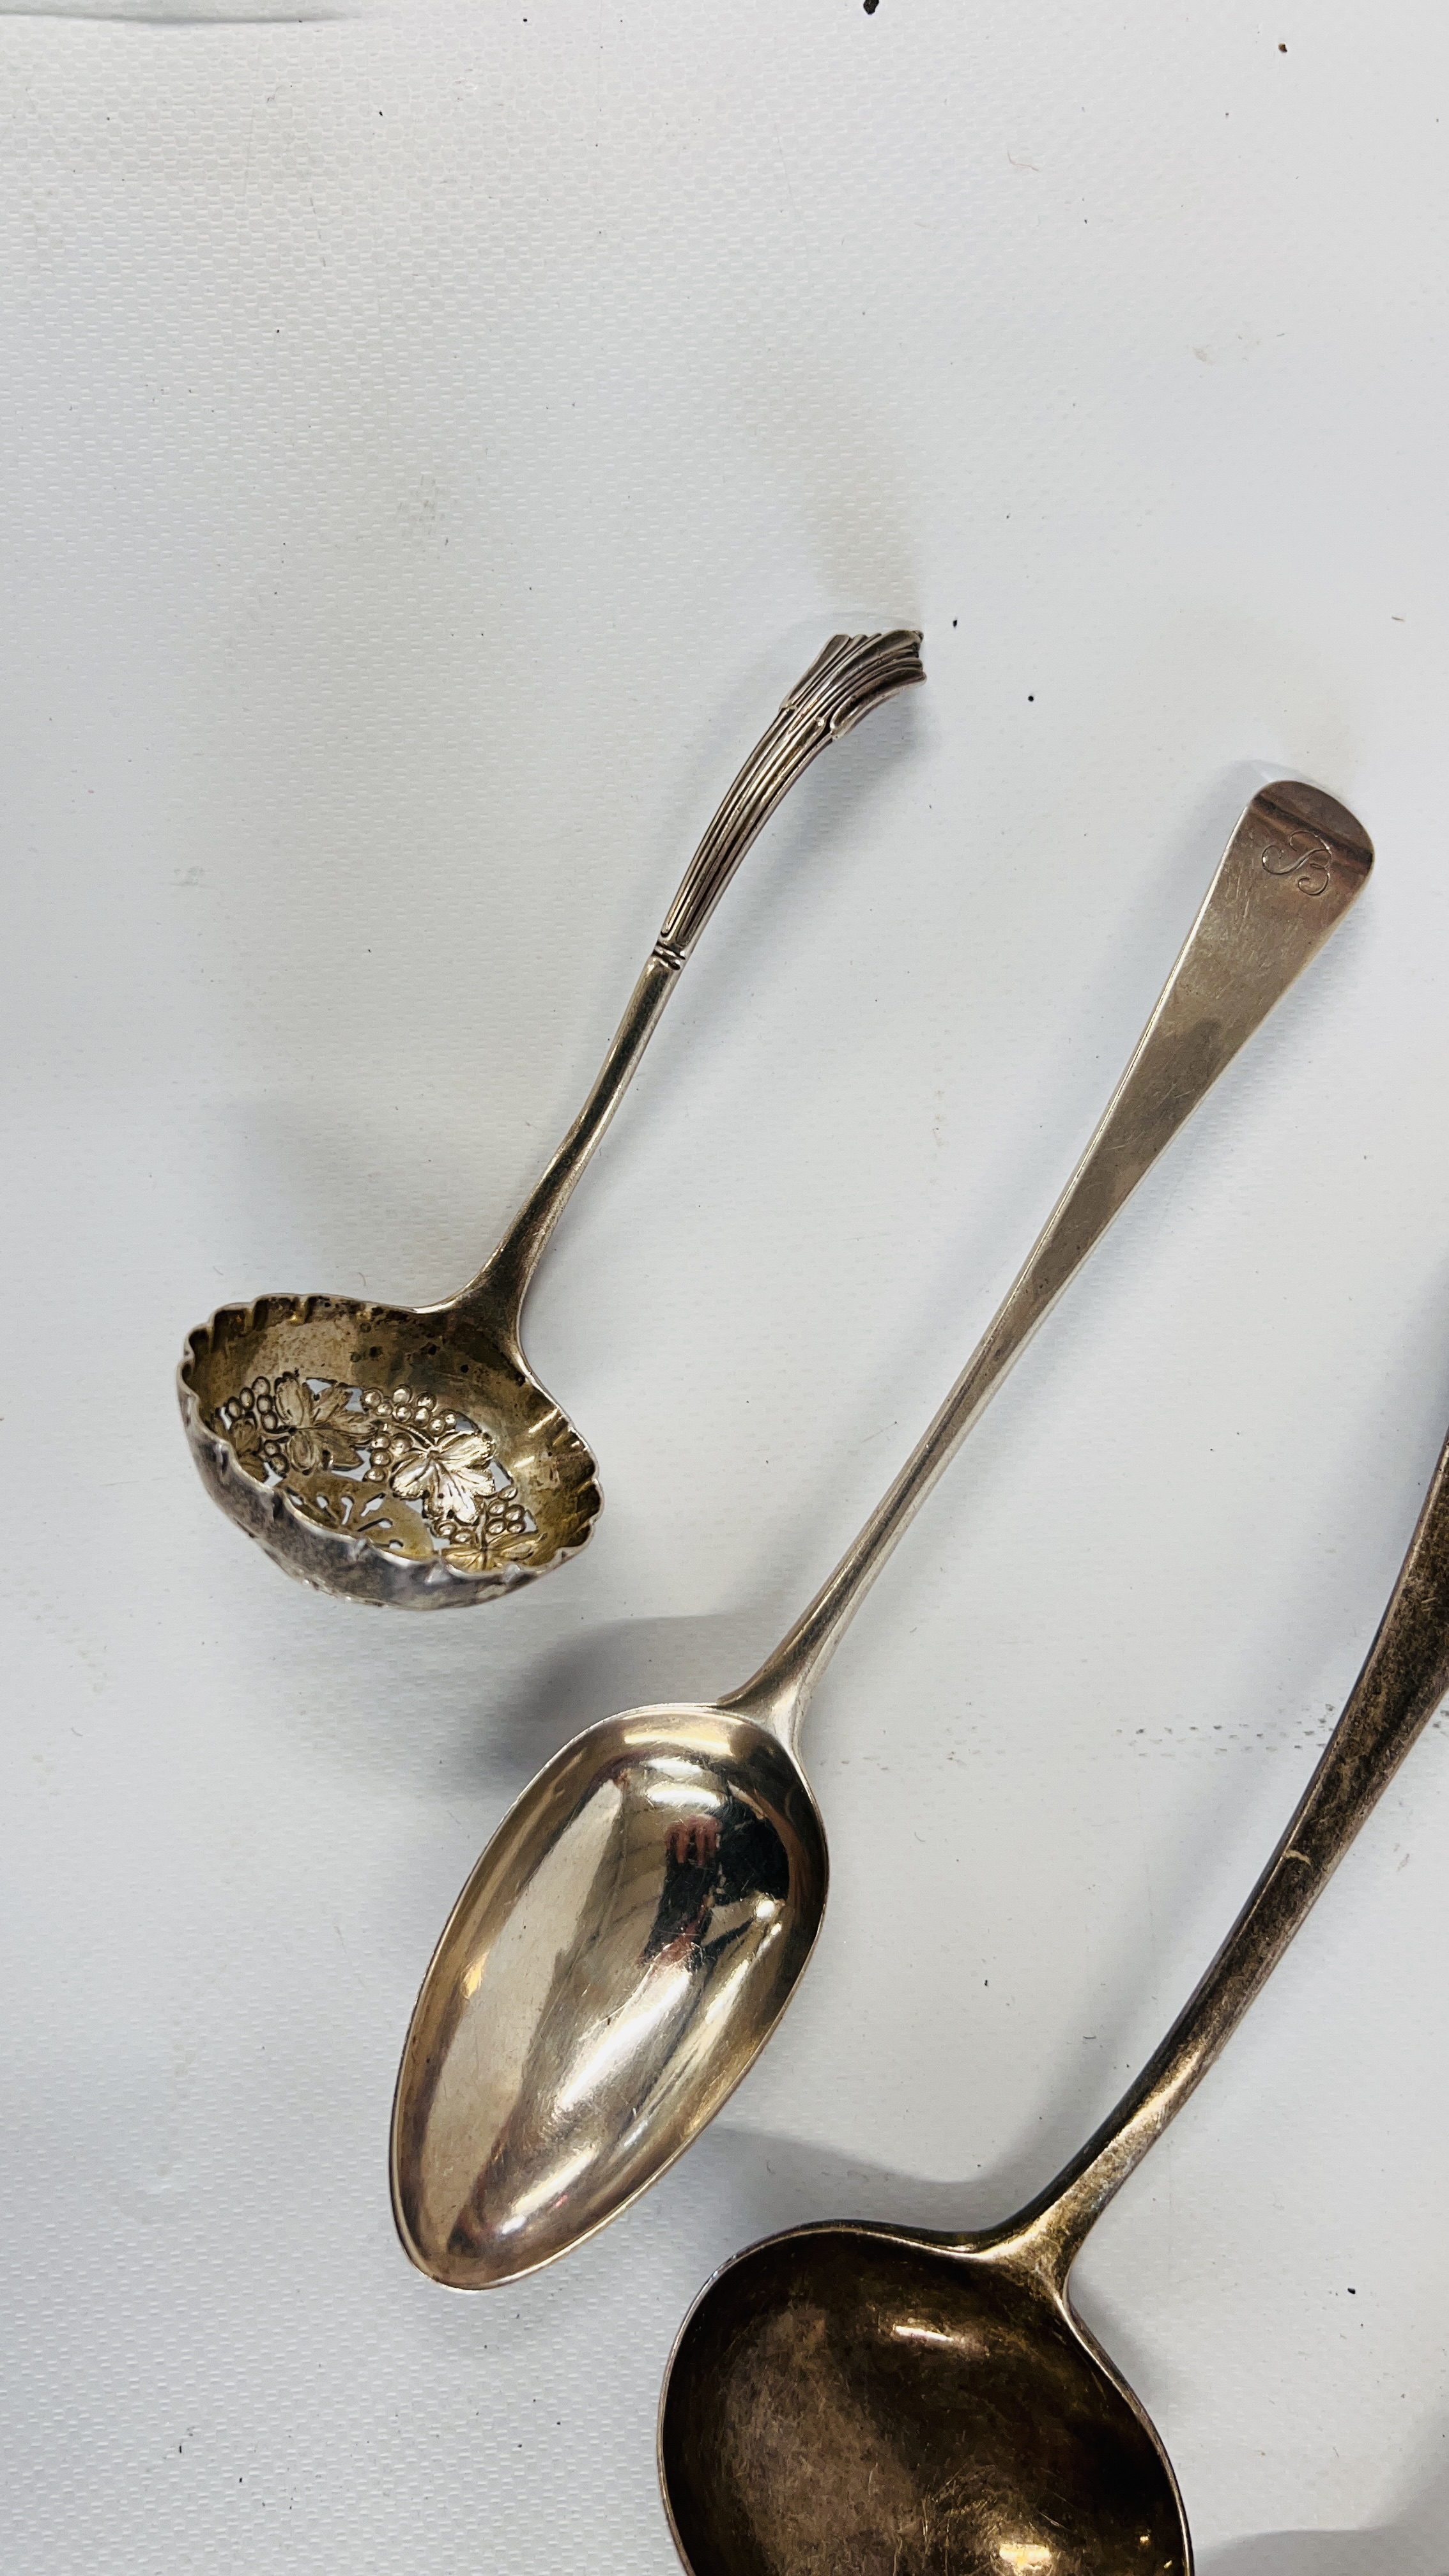 A SILVER DESSERT SPOON, PETER BATEMAN, LONDON 1796, ALONG WITH A GEORGE III SILVER SERVING SPOON, - Image 4 of 6